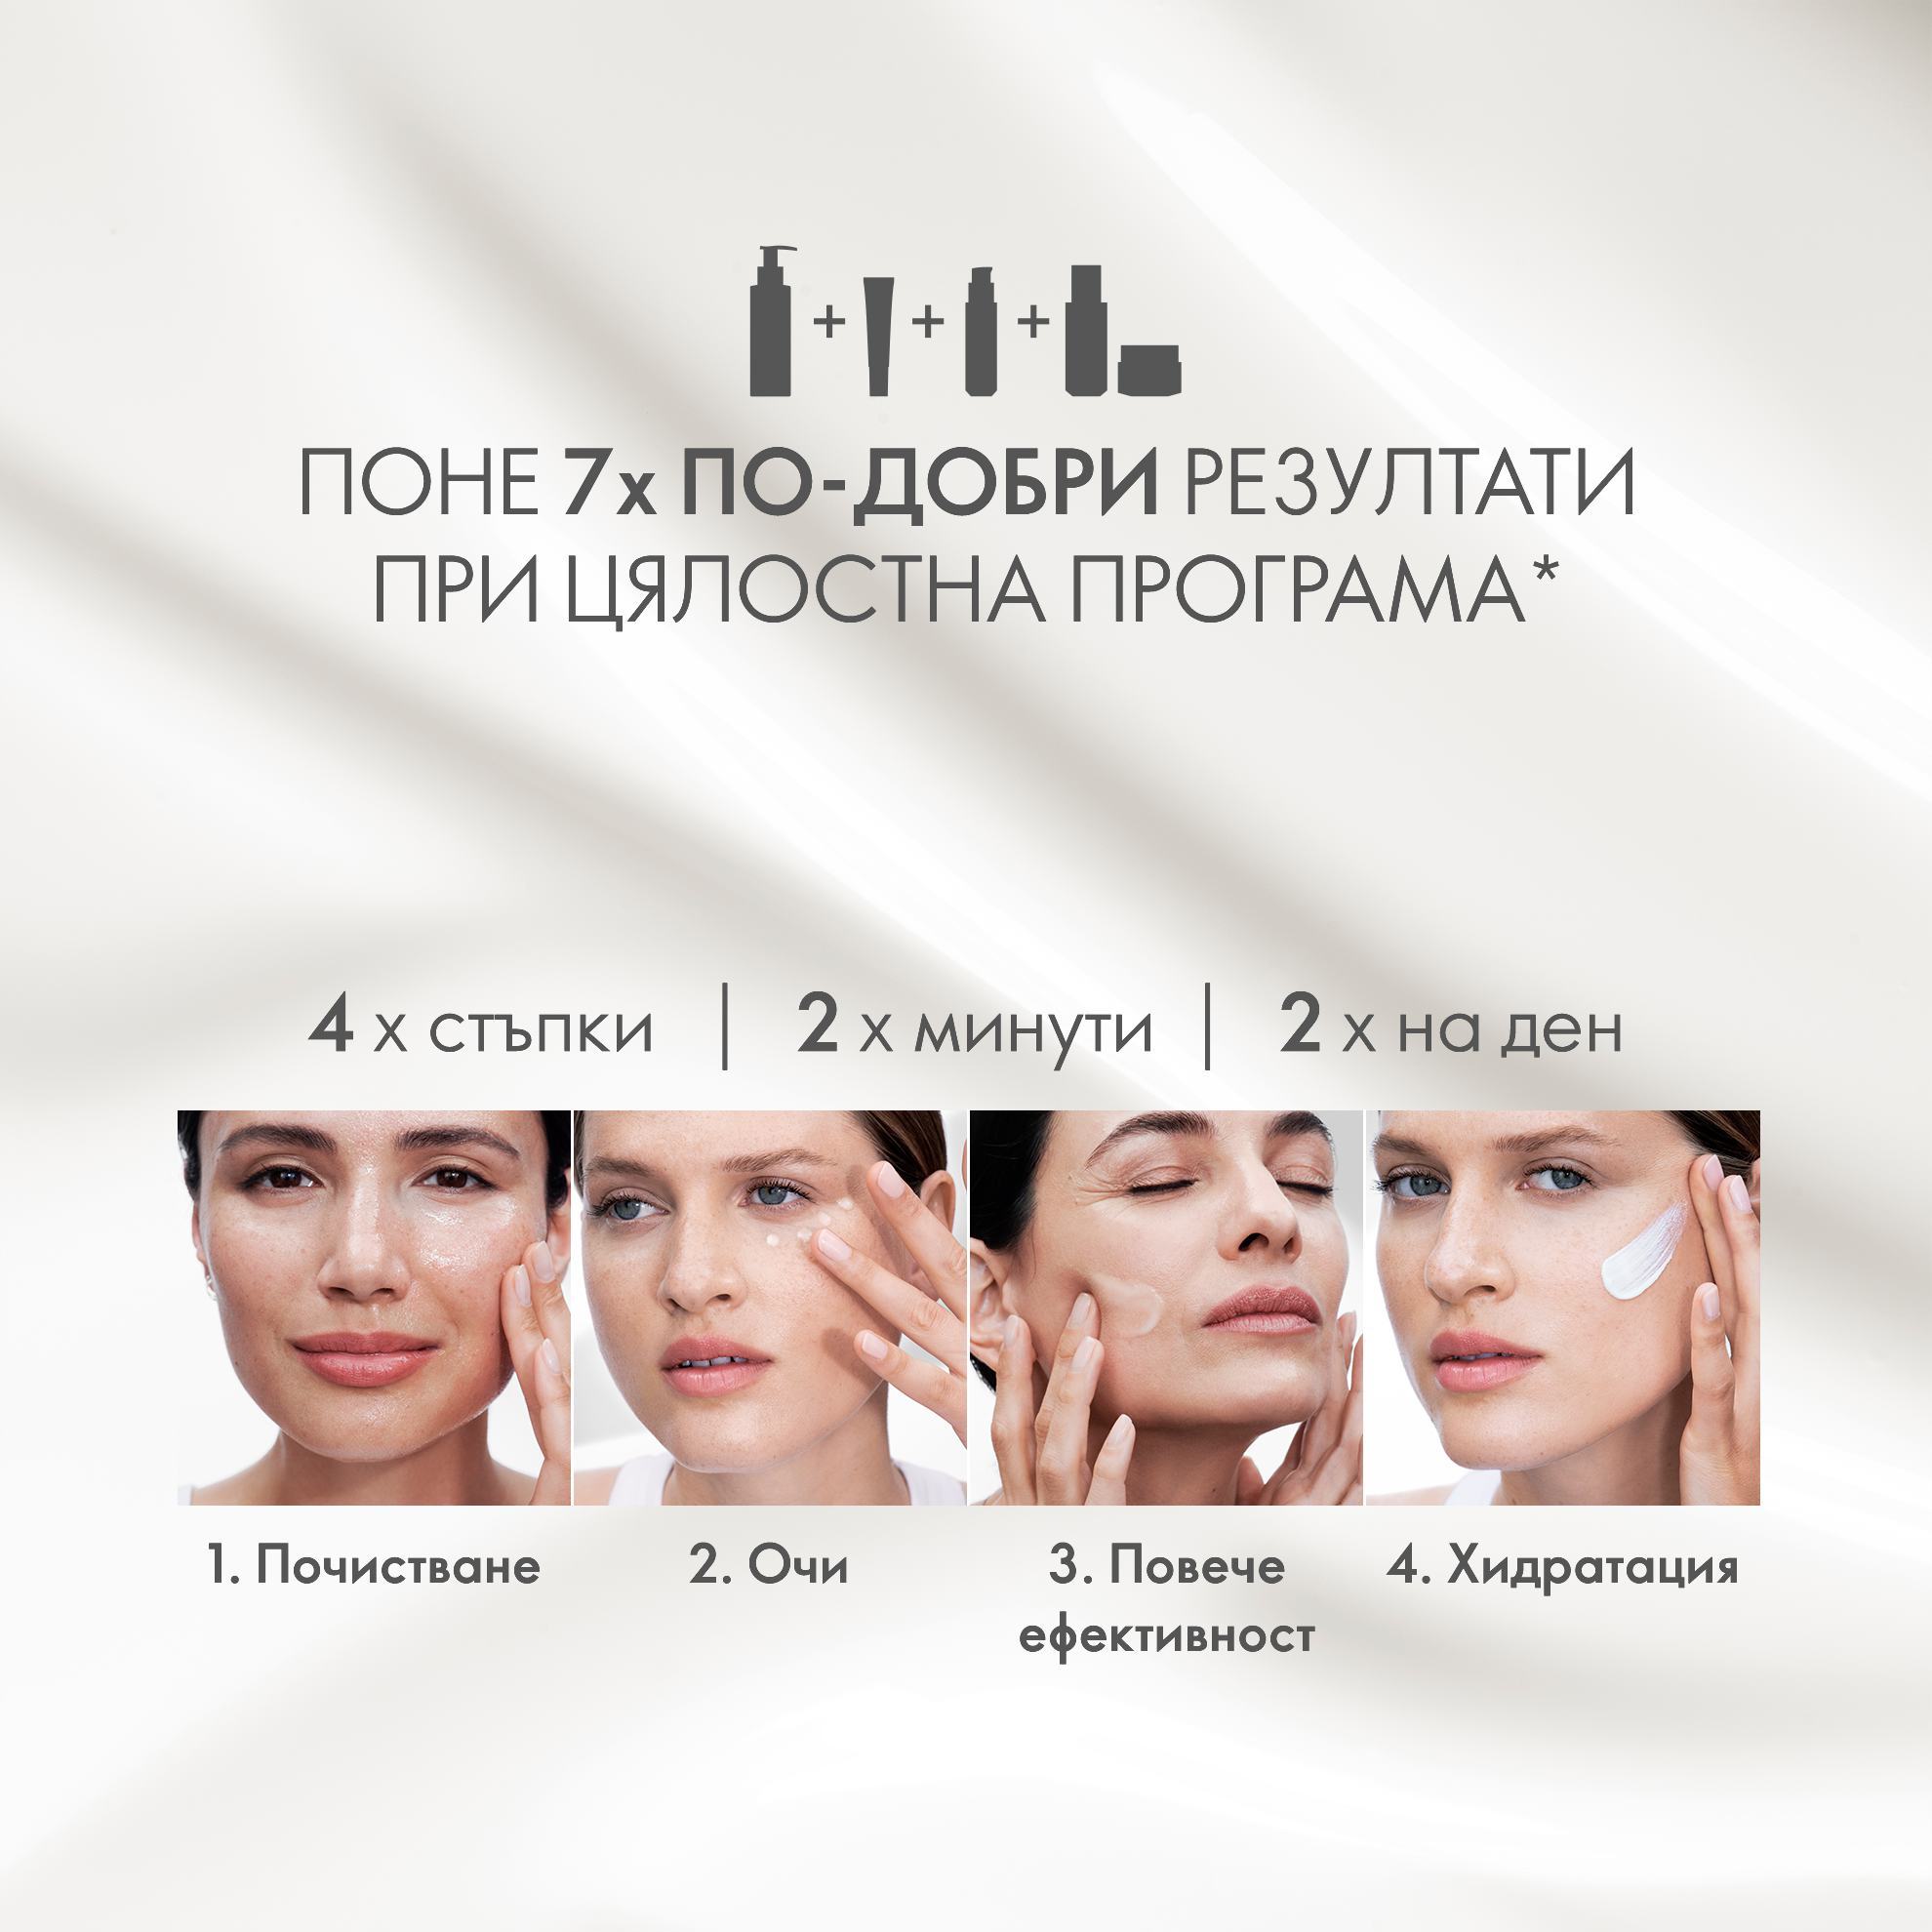 https://media-cdn.oriflame.com/productImage?externalMediaId=product-management-media%2fProducts%2f45590%2fBG%2f45590_4.png&id=17575842&version=1